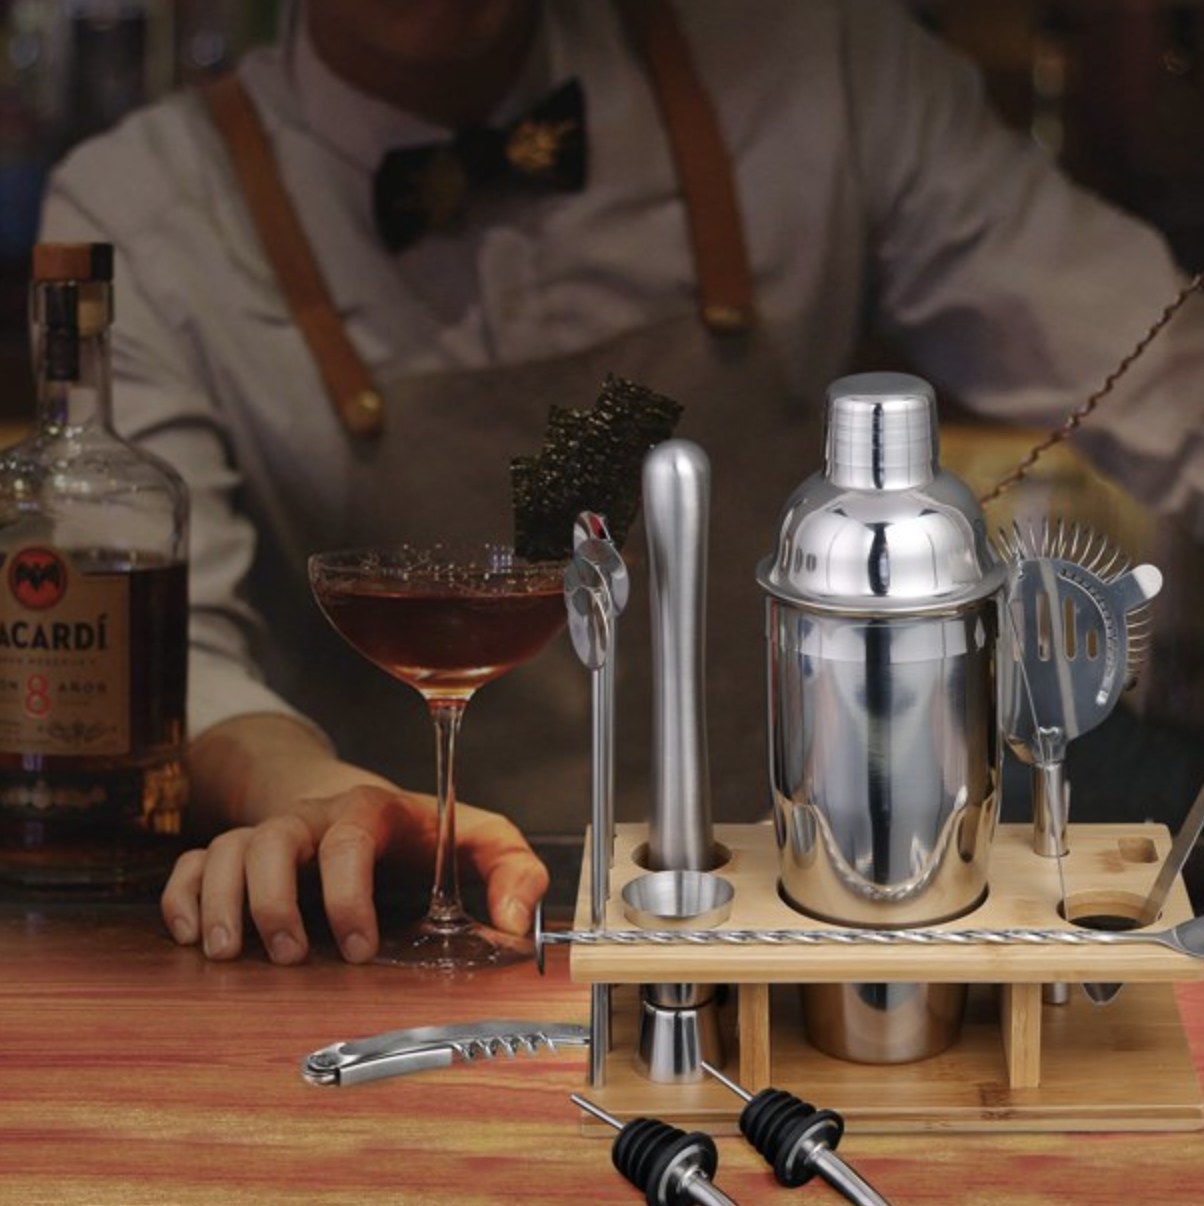 The cocktail kit being used to mix a drink